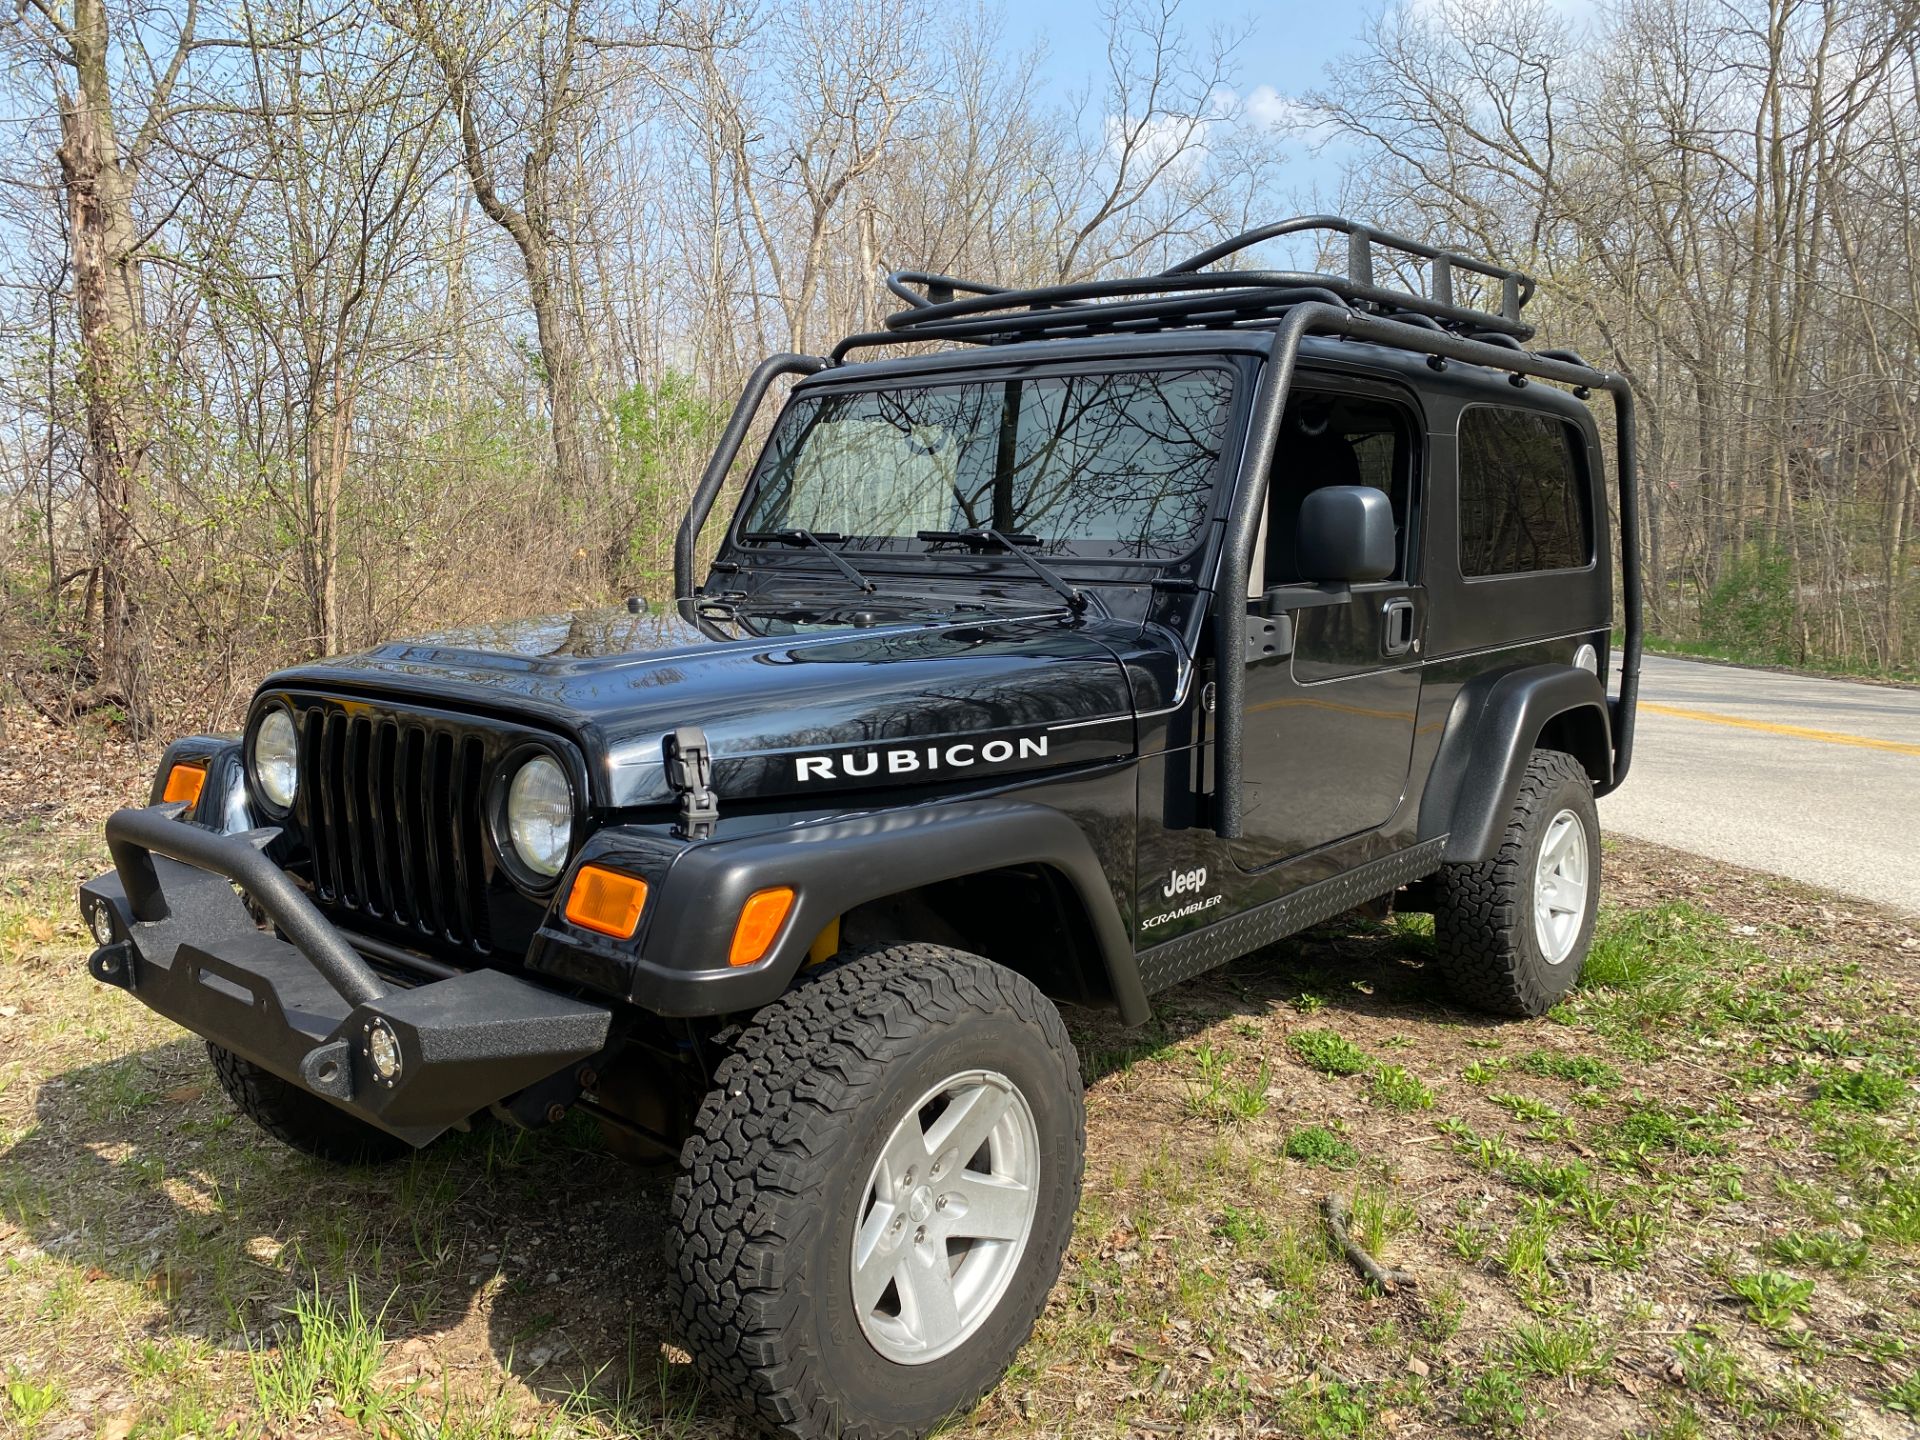 2006 Jeep® Wrangler Unlimited Rubicon in Big Bend, Wisconsin - Photo 22